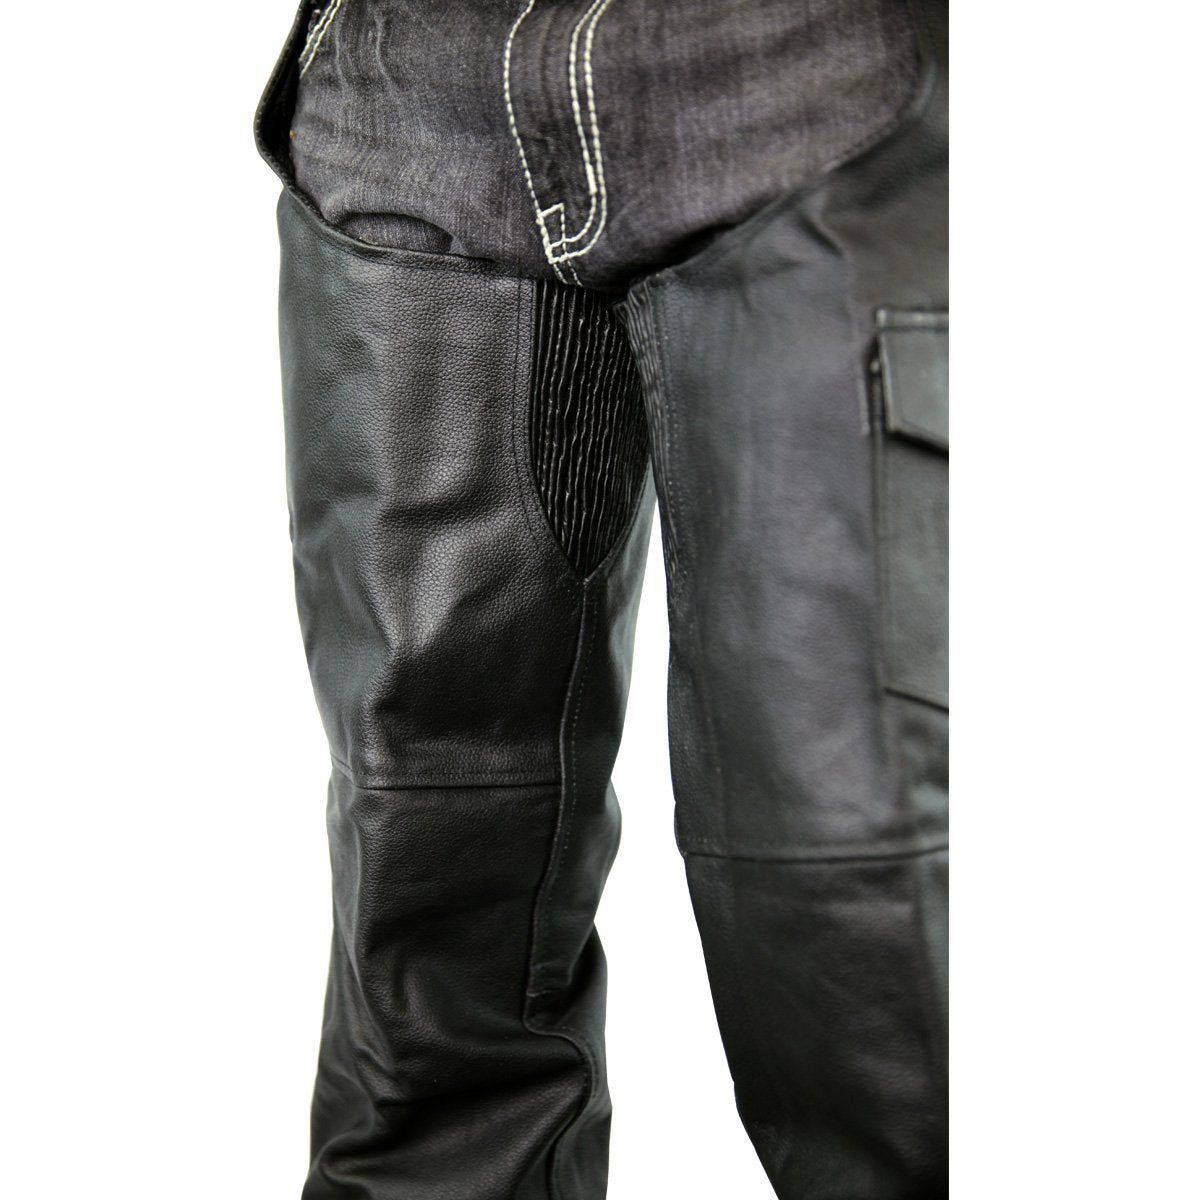 Vance Leather Zip-Out Insulated and Lined Plain Biker Leather Chaps, Unisex